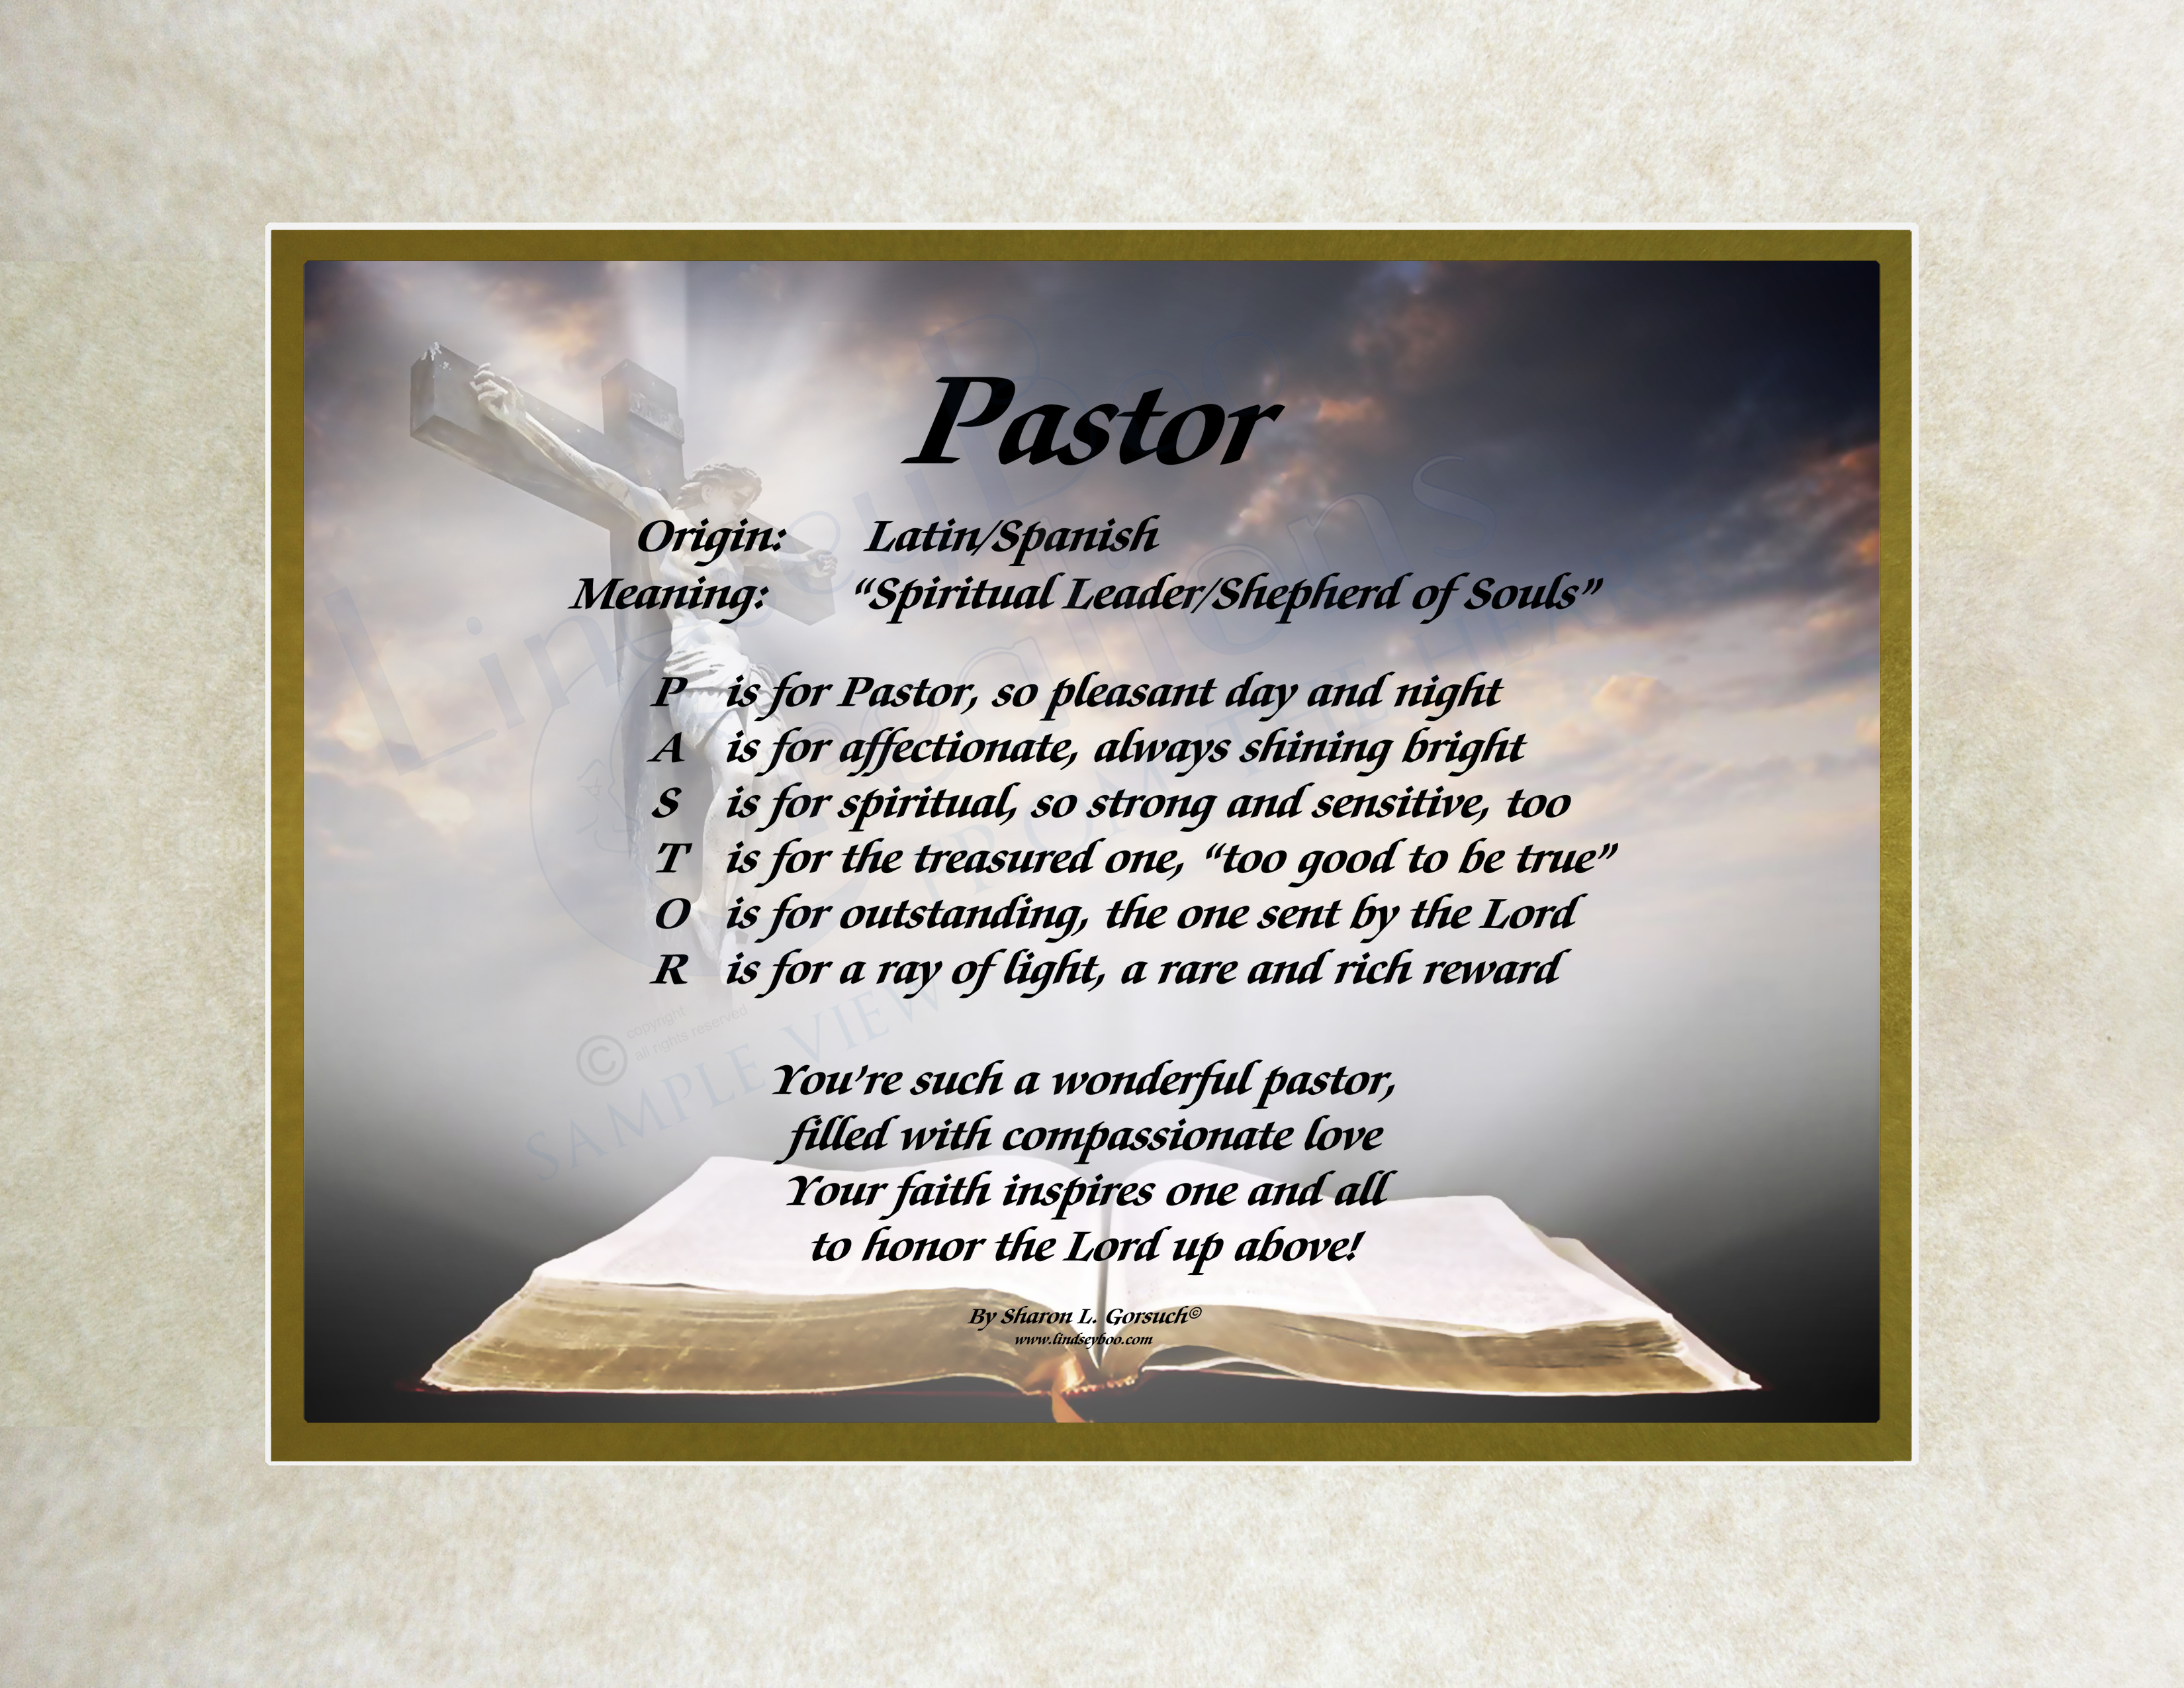 Clip Arts Related To : our pastor appreciation day poems. 